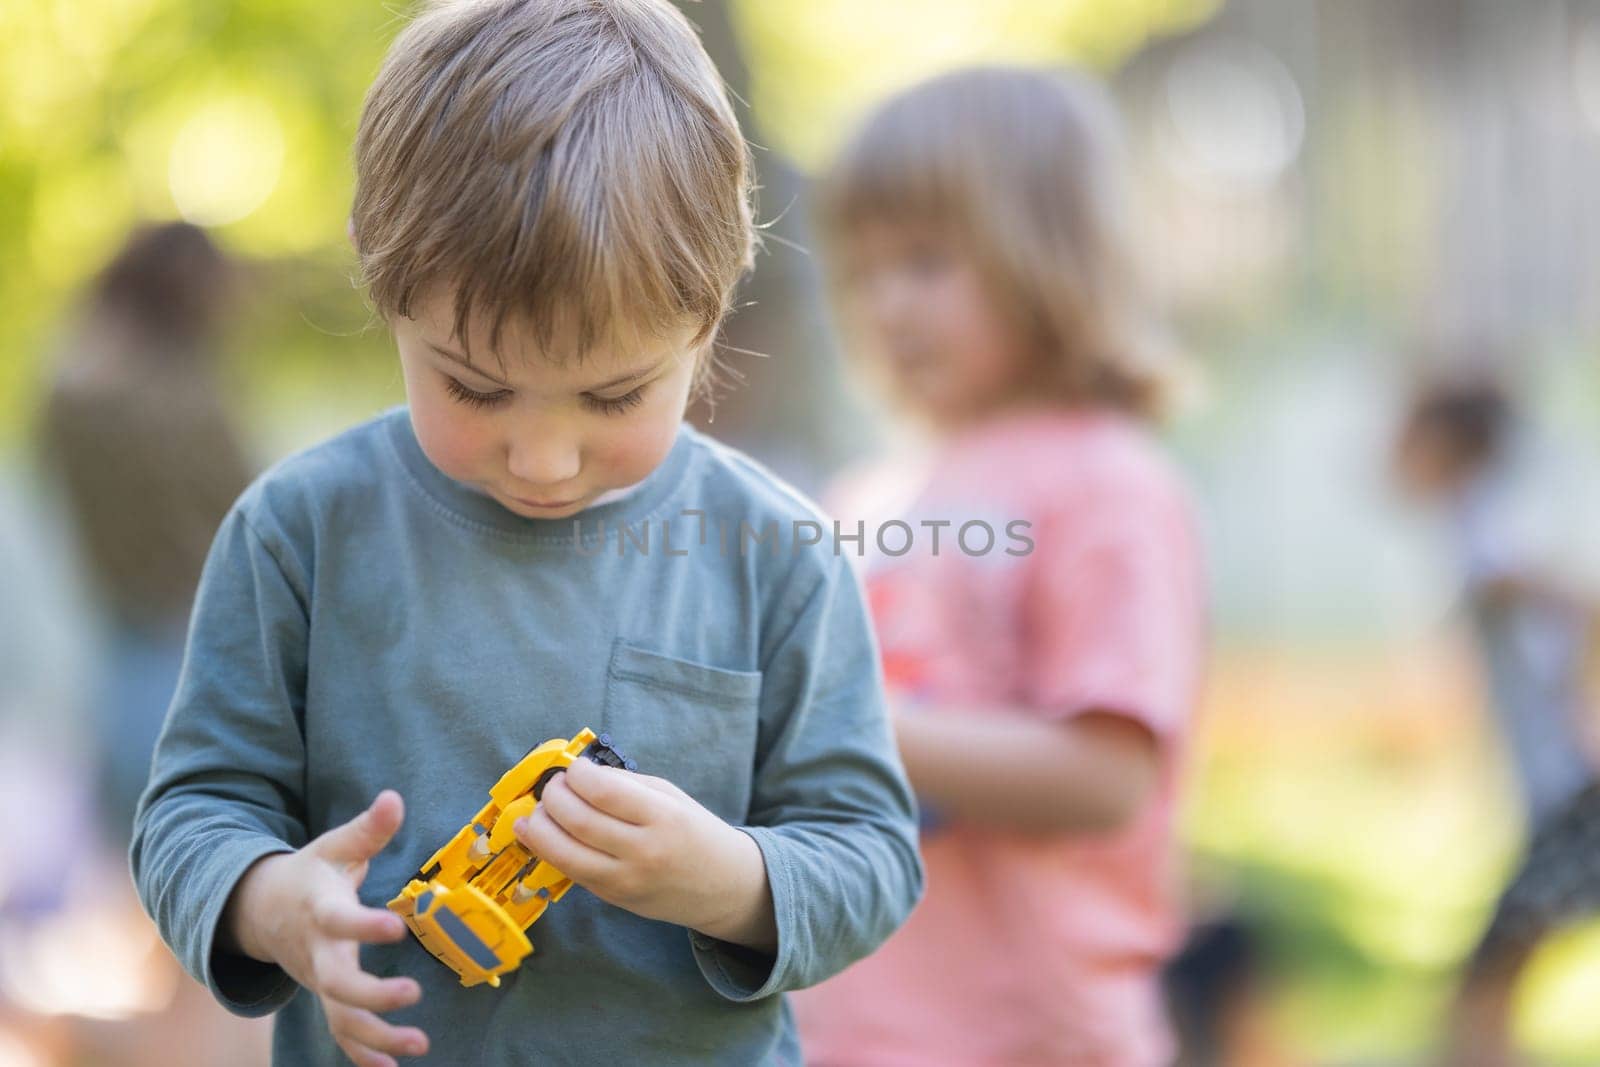 A boy is holding a toy car in his hand. He is looking at the camera. There are other children in the background